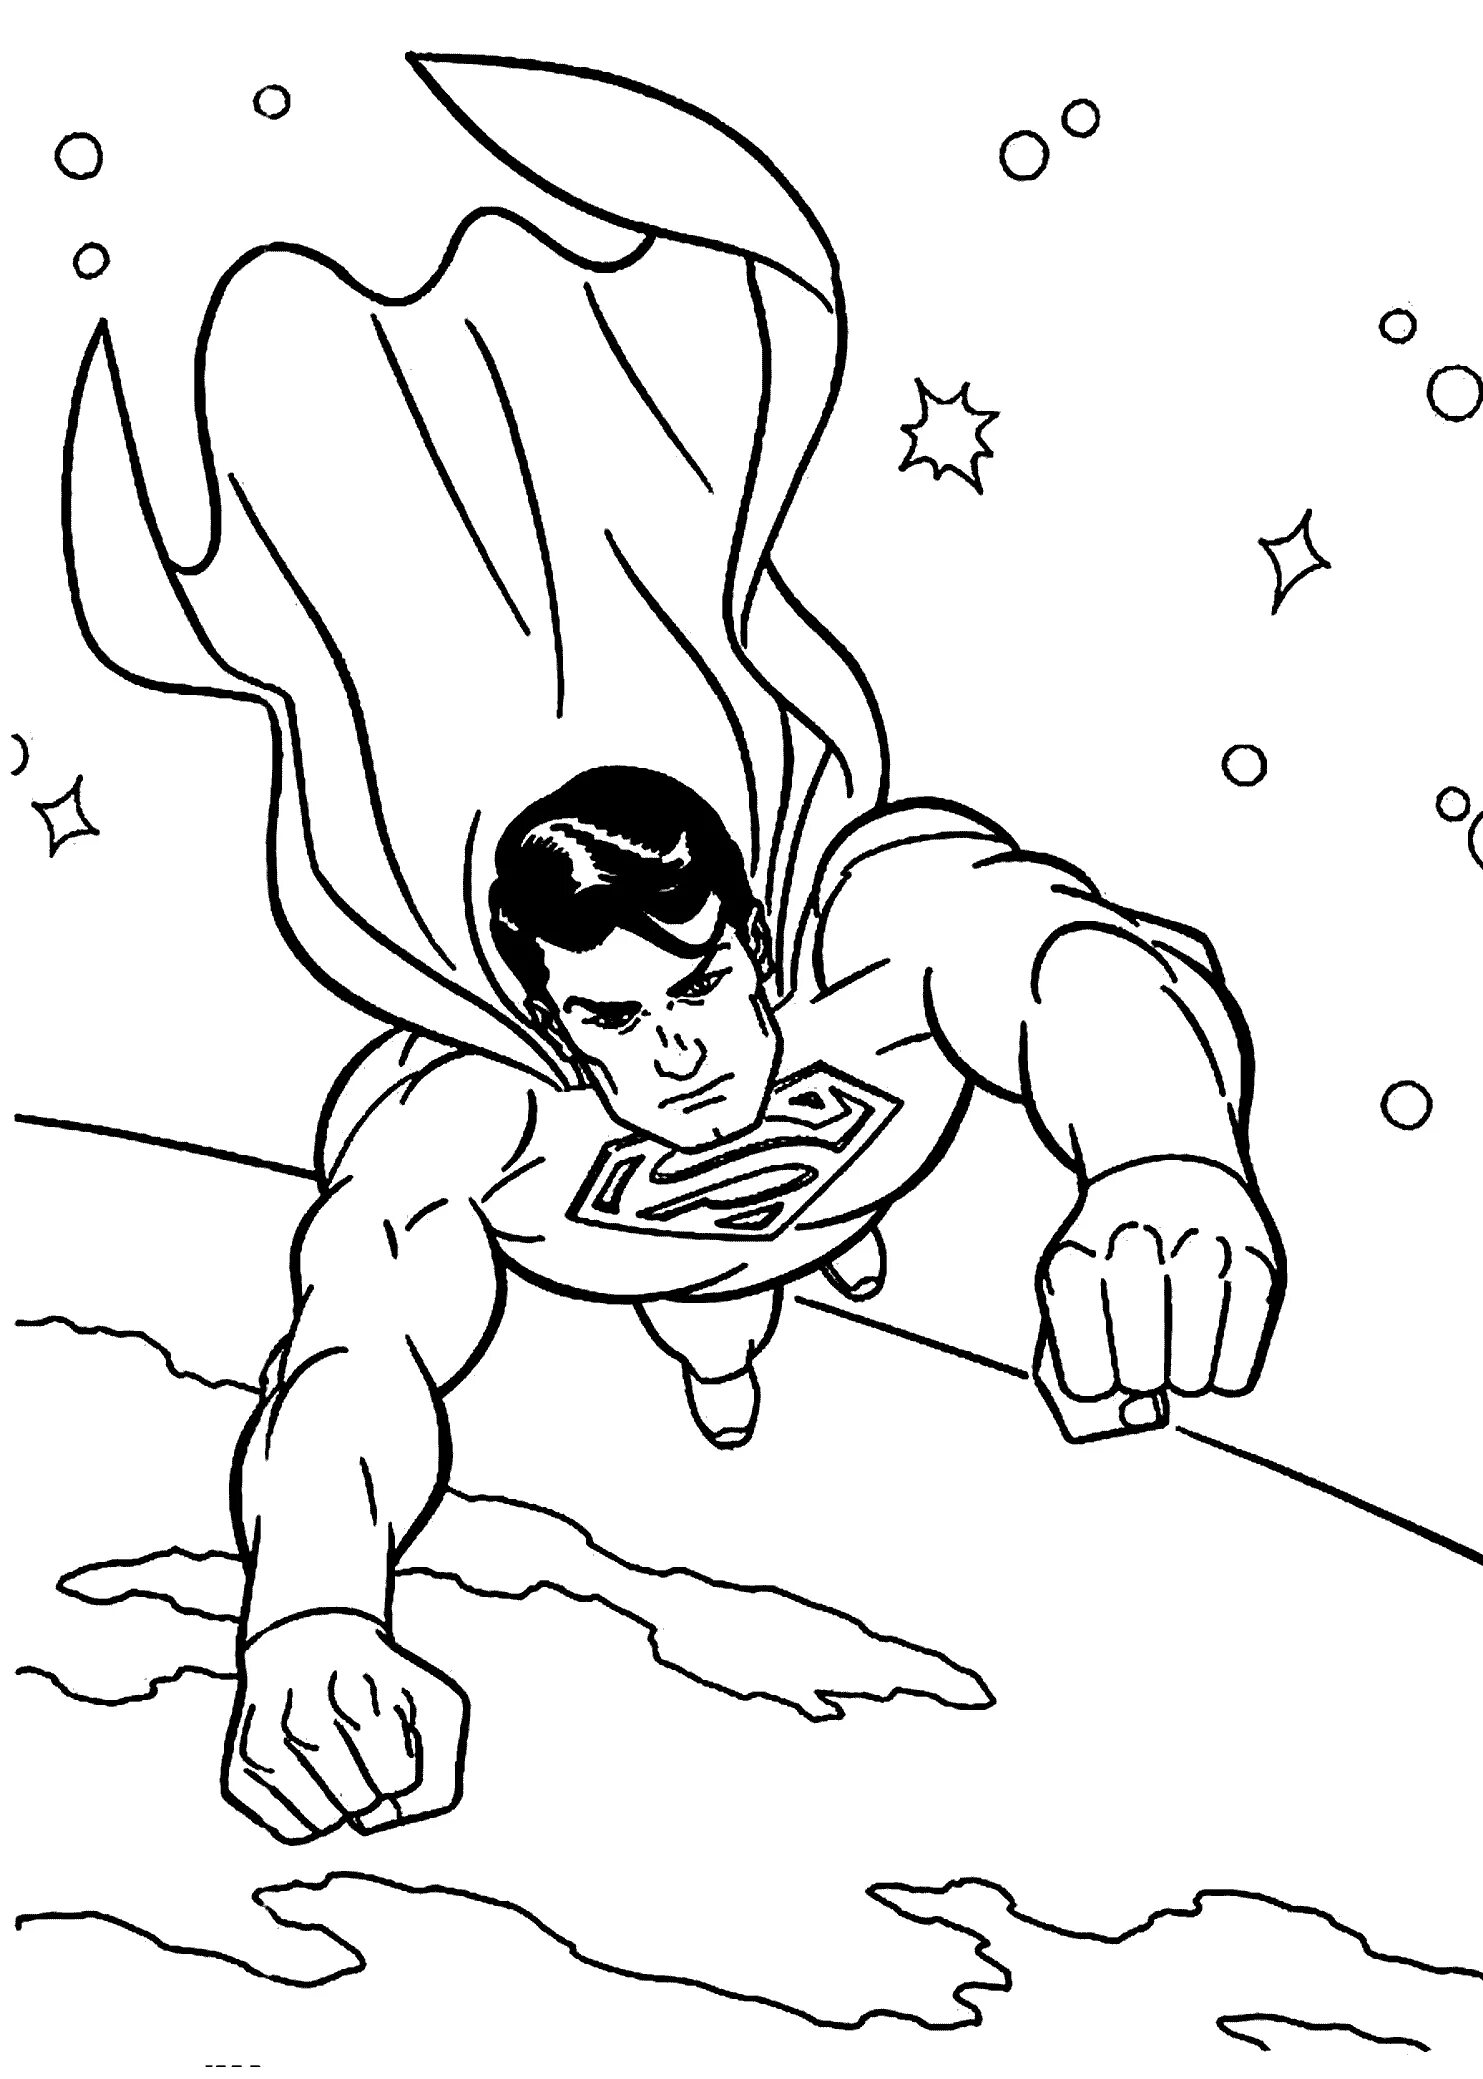 Crazy Superman coloring book for 3-4 year olds